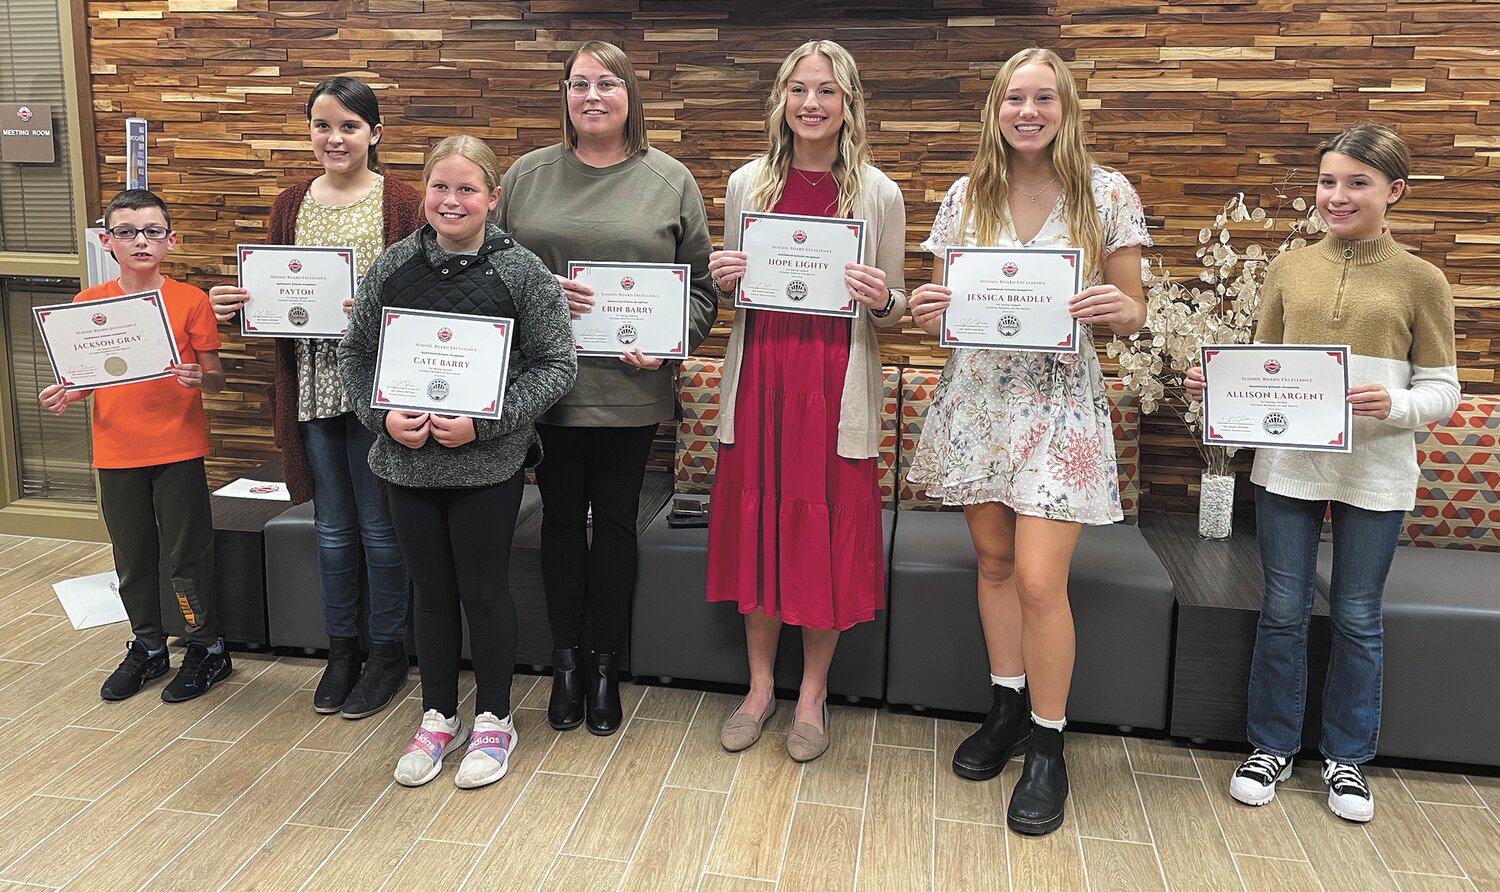 October students and staff members of the month were recognized Monday by the school board.